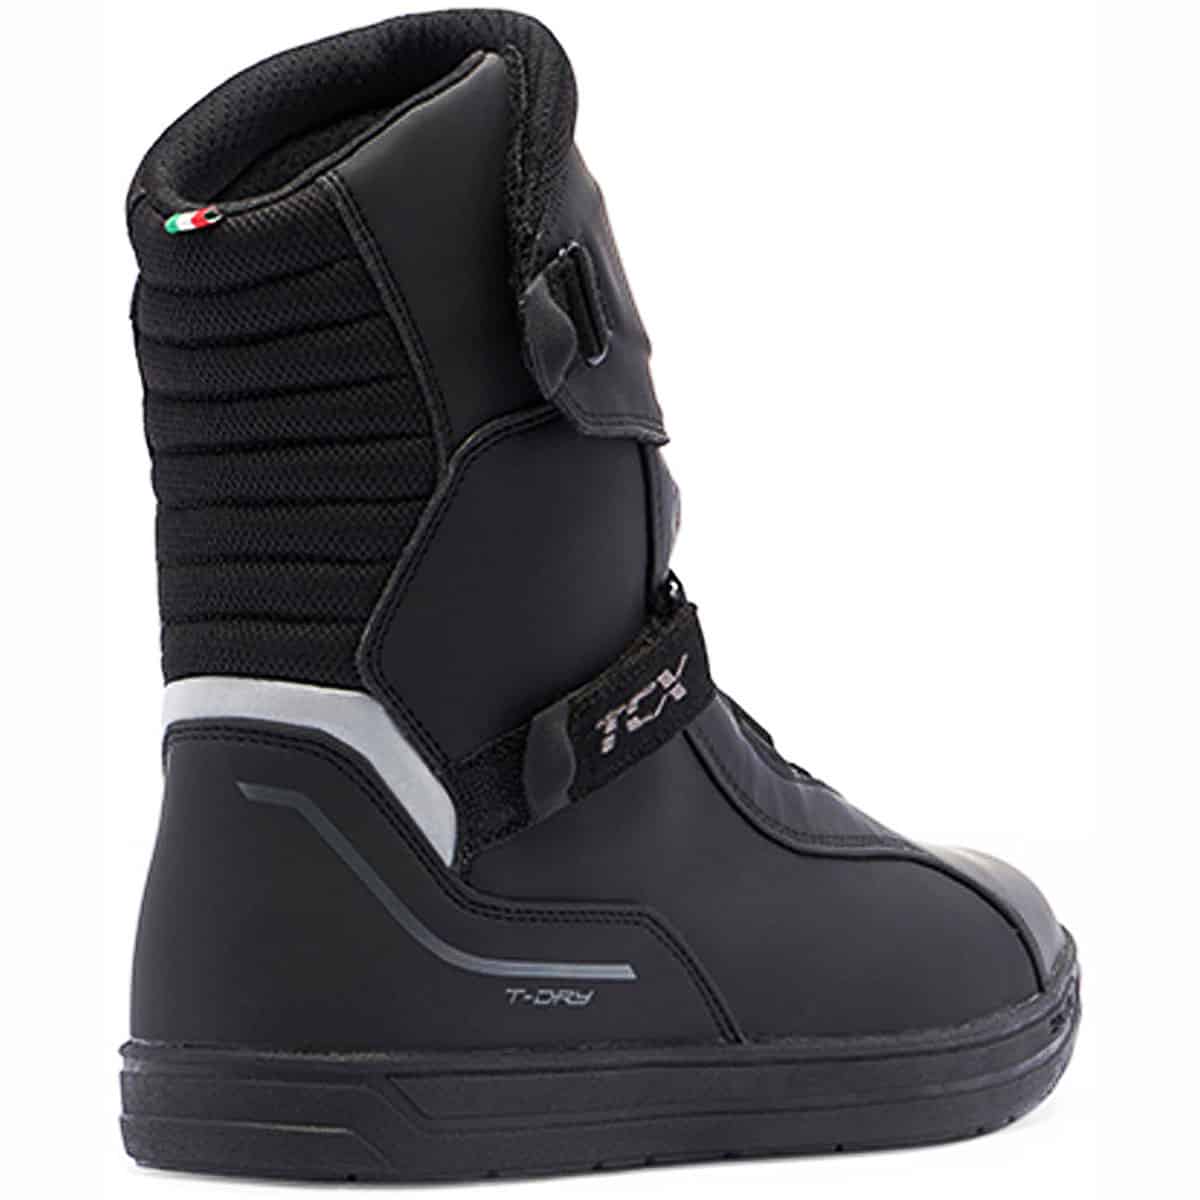 TCX Touring Boots with innovative lacing closure for perfect fit - 45 deg back